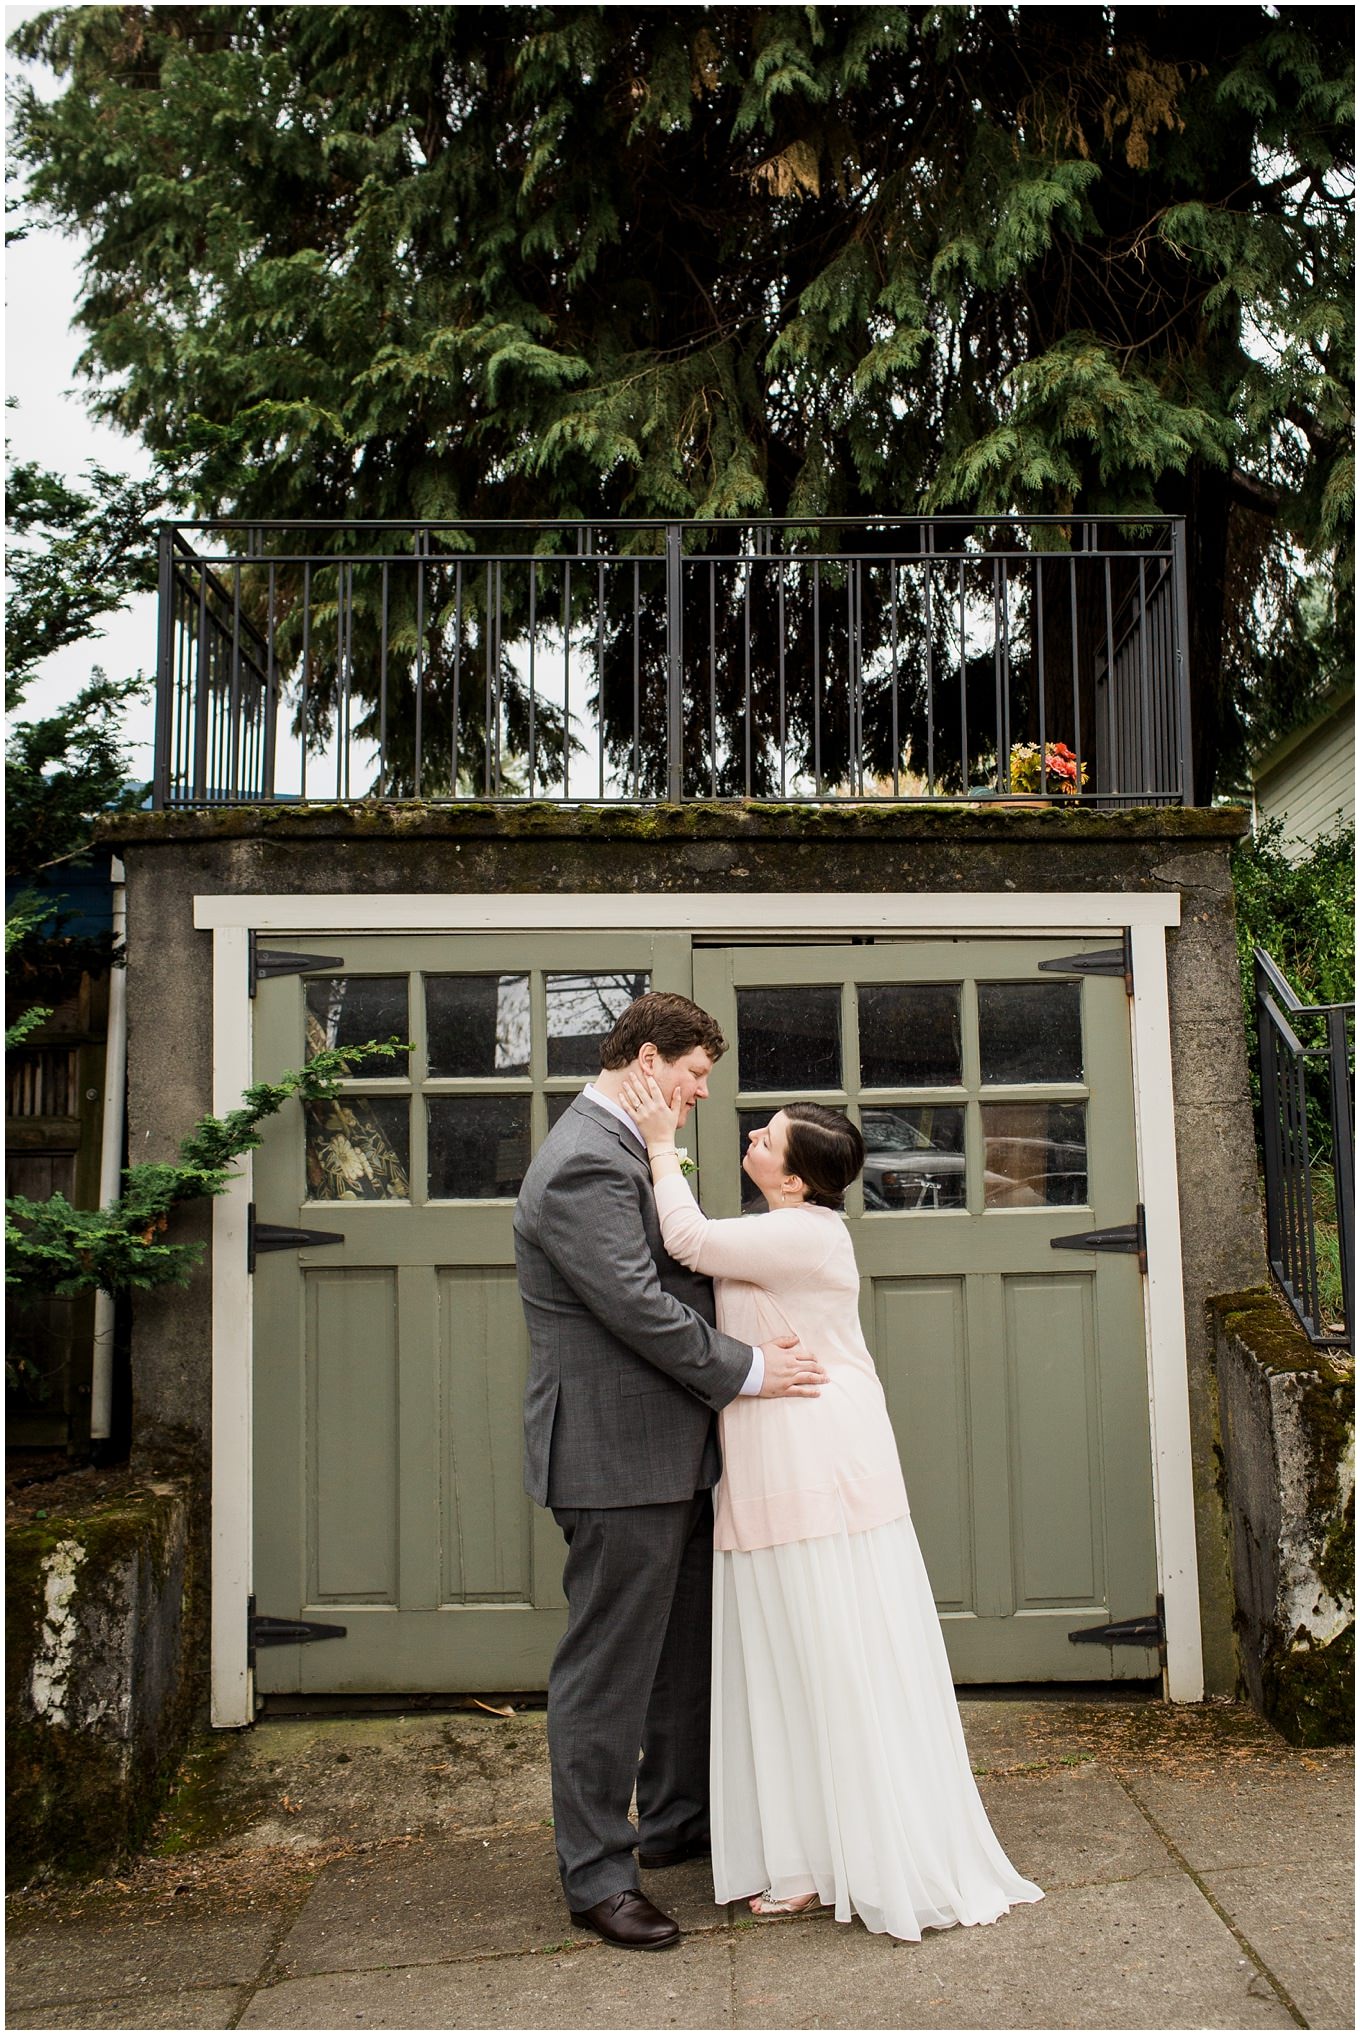 adam lowe photography, Portland, Oregon, Wedding, cathedral park, PDX, pacific northwest, outdoor wedding, bride and groom, coopers hall